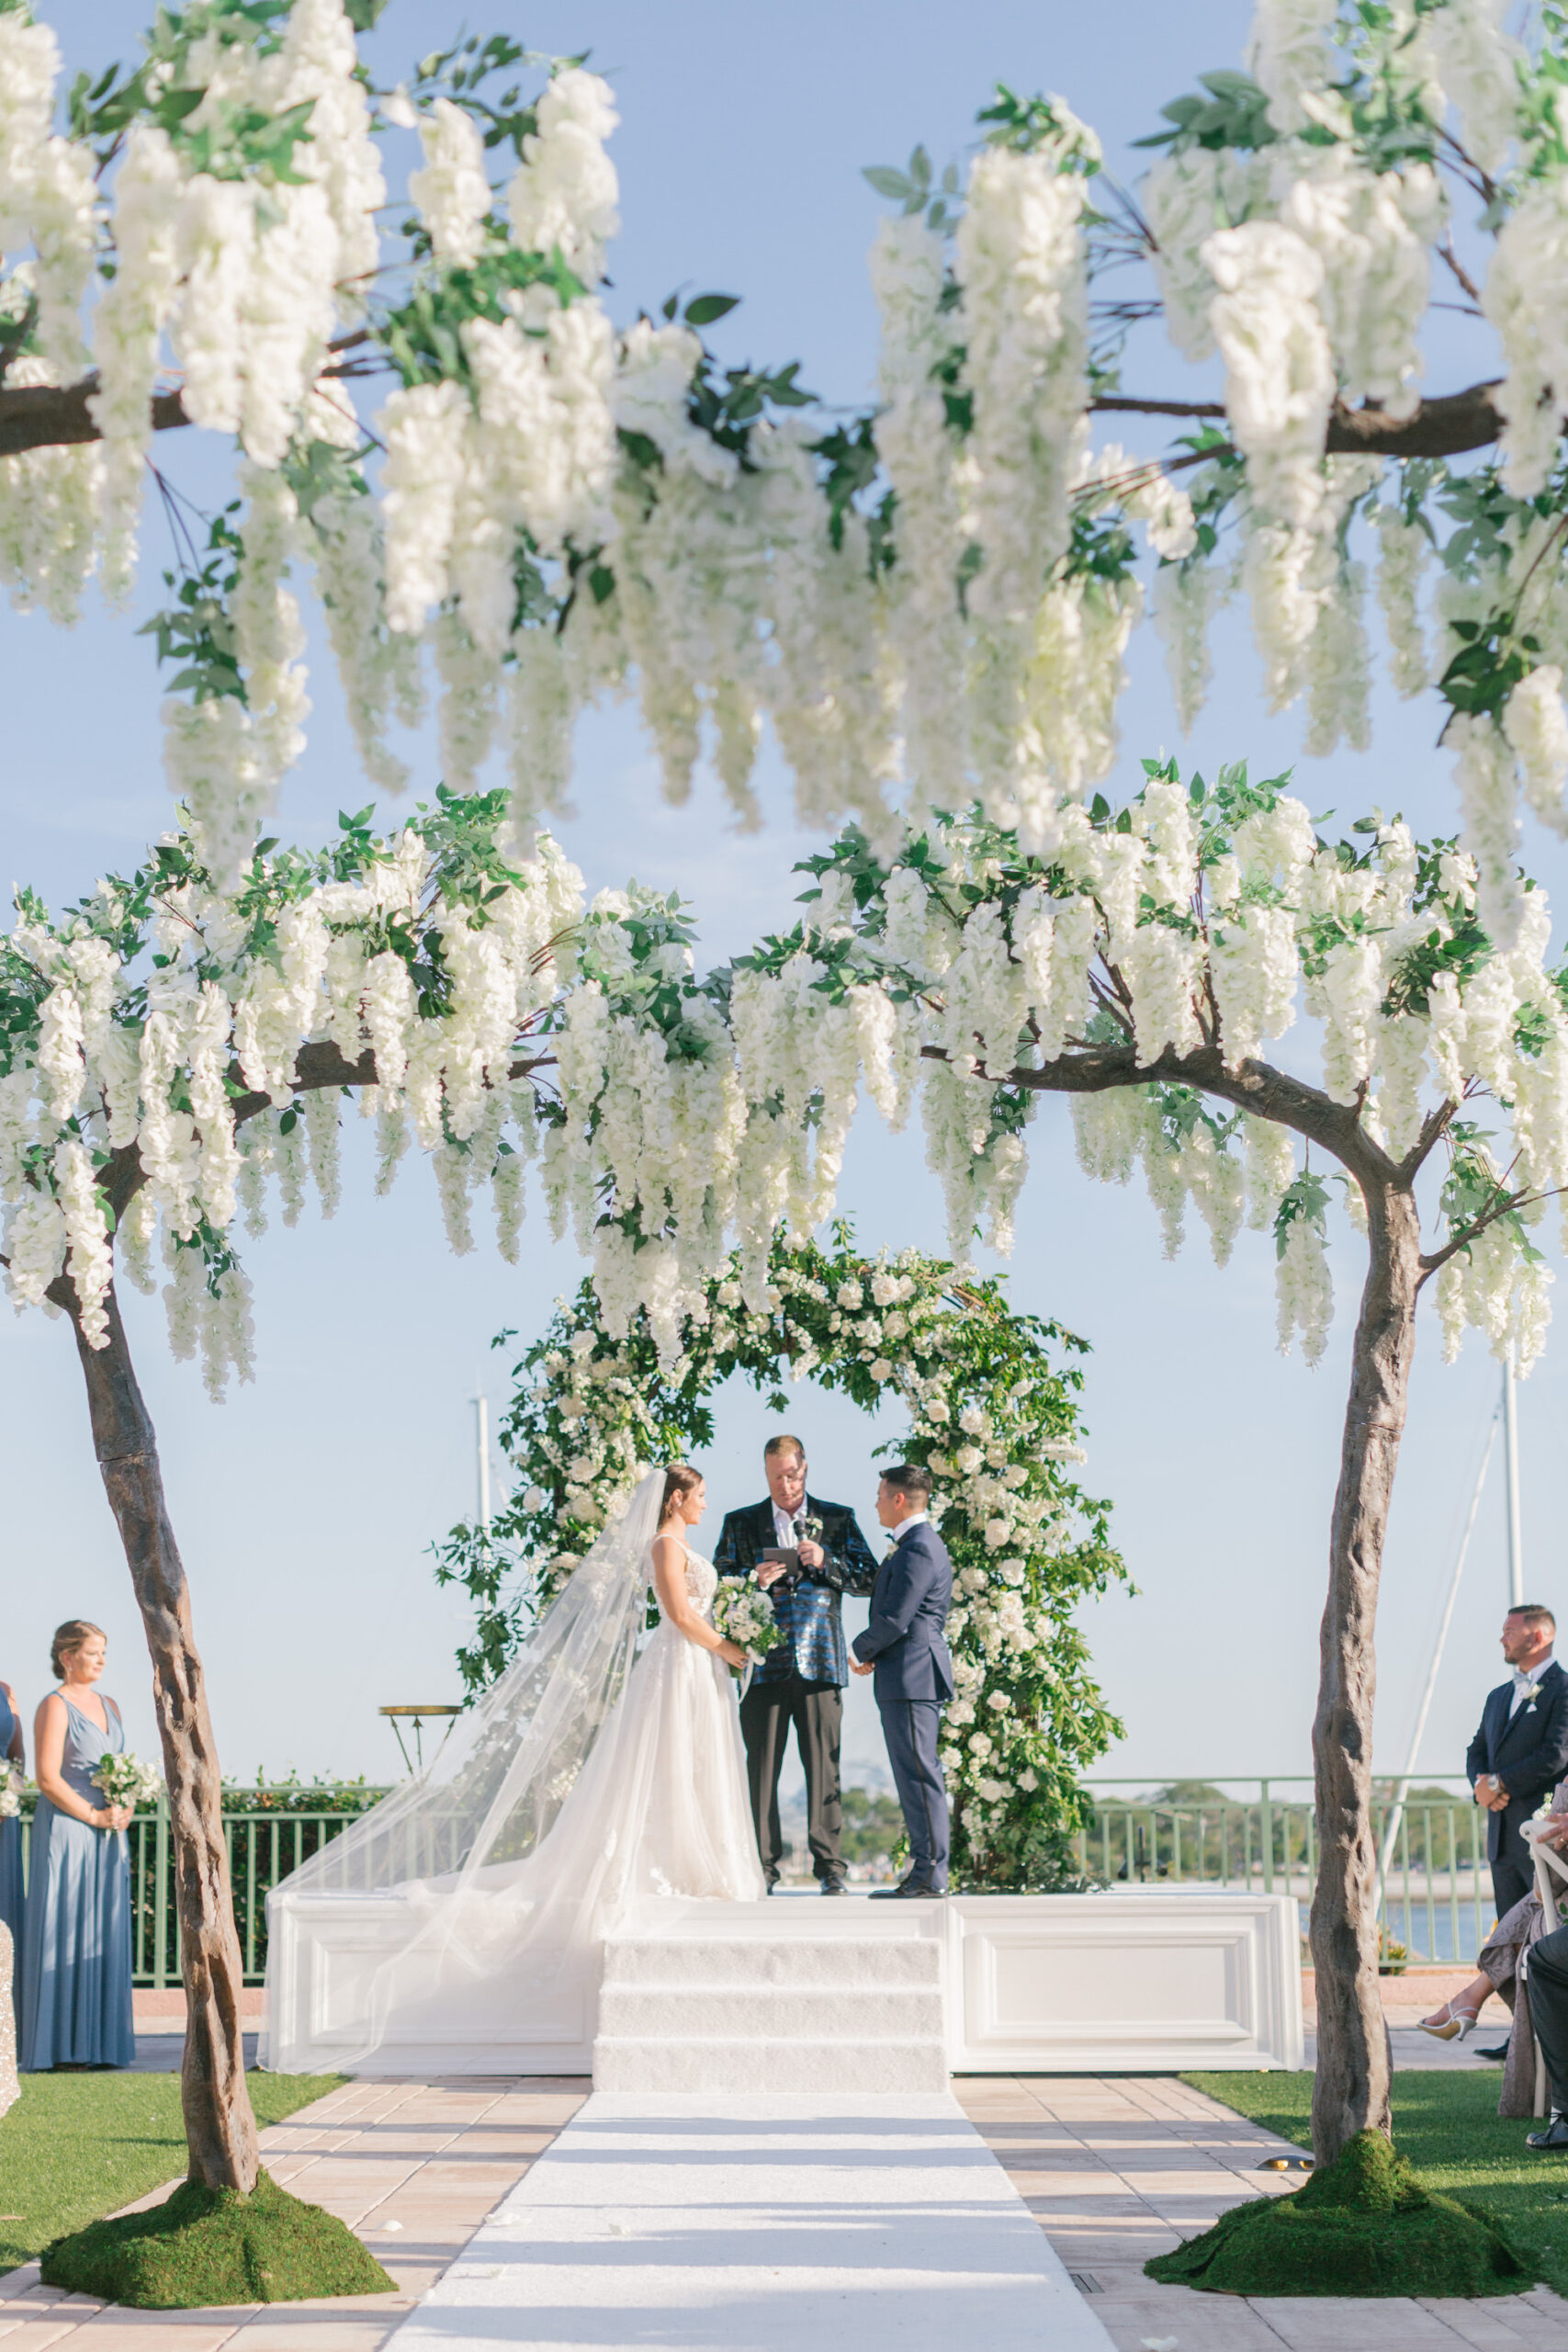 Tall Wisteria Tree Wedding Aisle Decor | Whimsical White and Greenery Garden Floral Wedding Arch with White Aisle Runner | Downtown St. Pete Venue The Vinoy | Planner Parties a La Carte | Videographer Mars the Moon Films